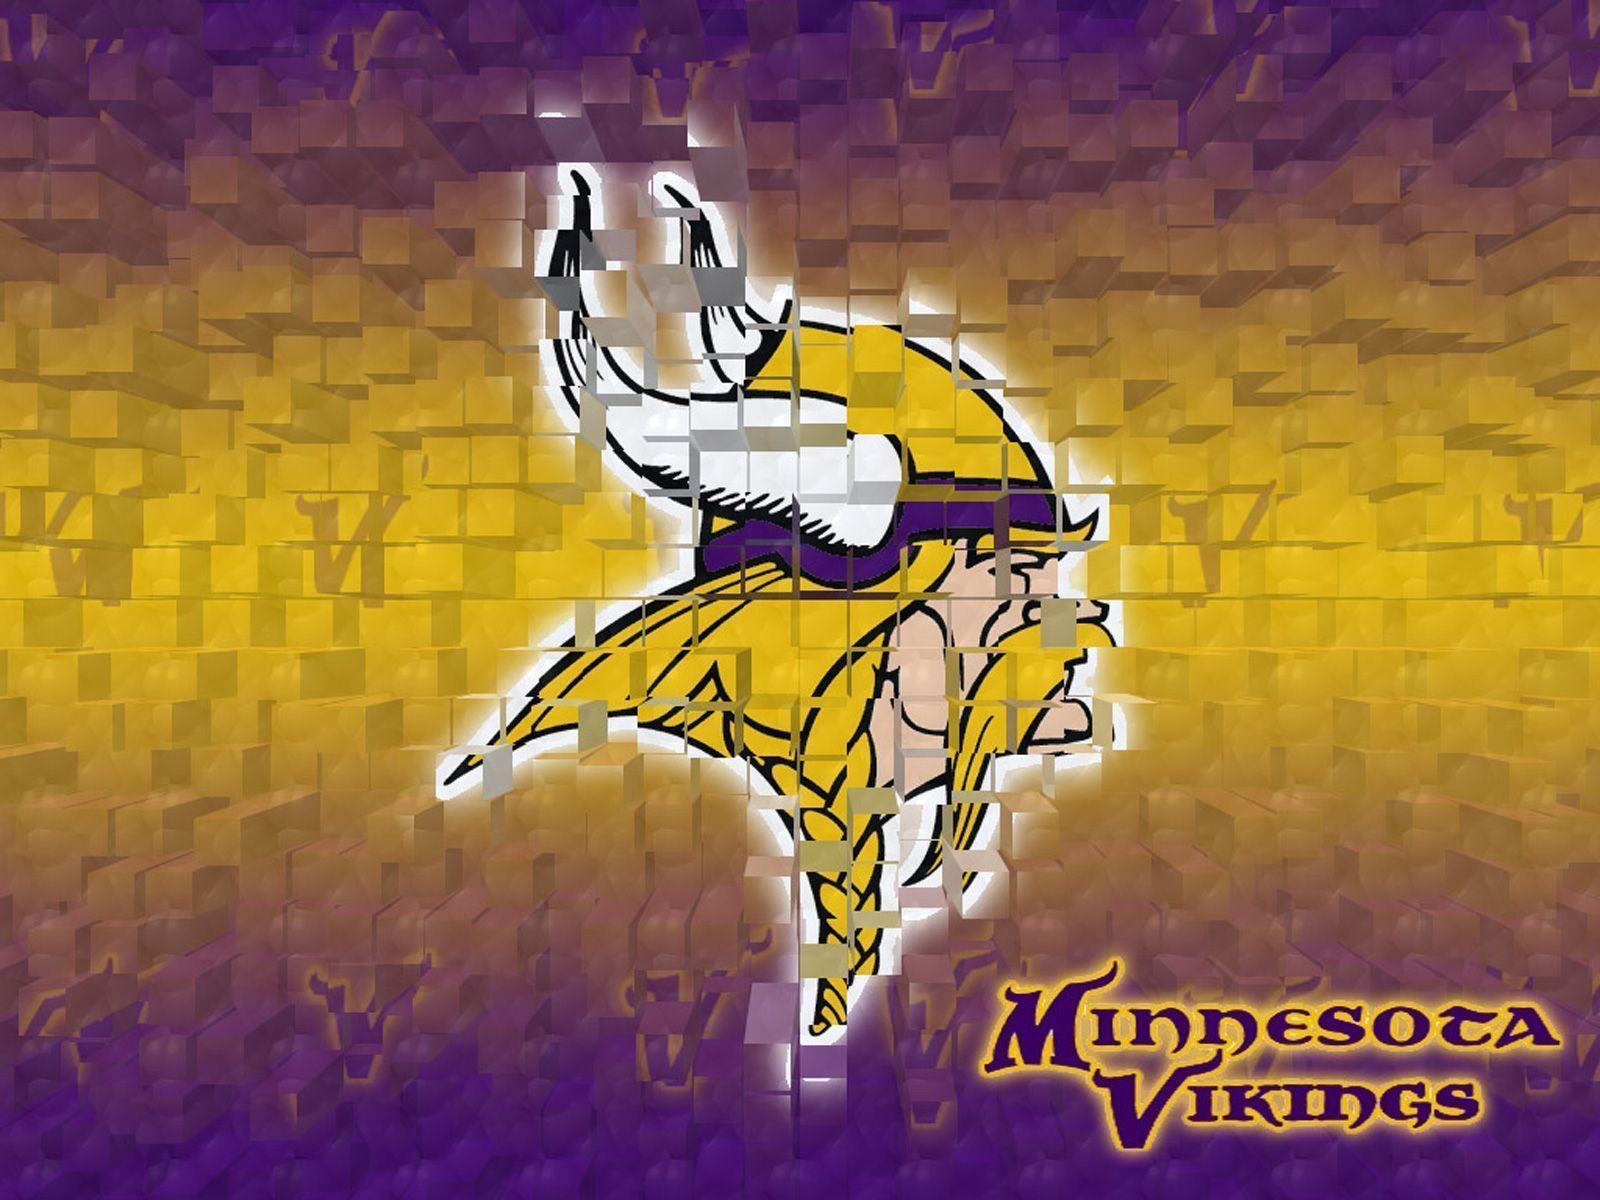 Marvellous Minnesota Vikings Wallpapers by Bacardee 1600x1200PX